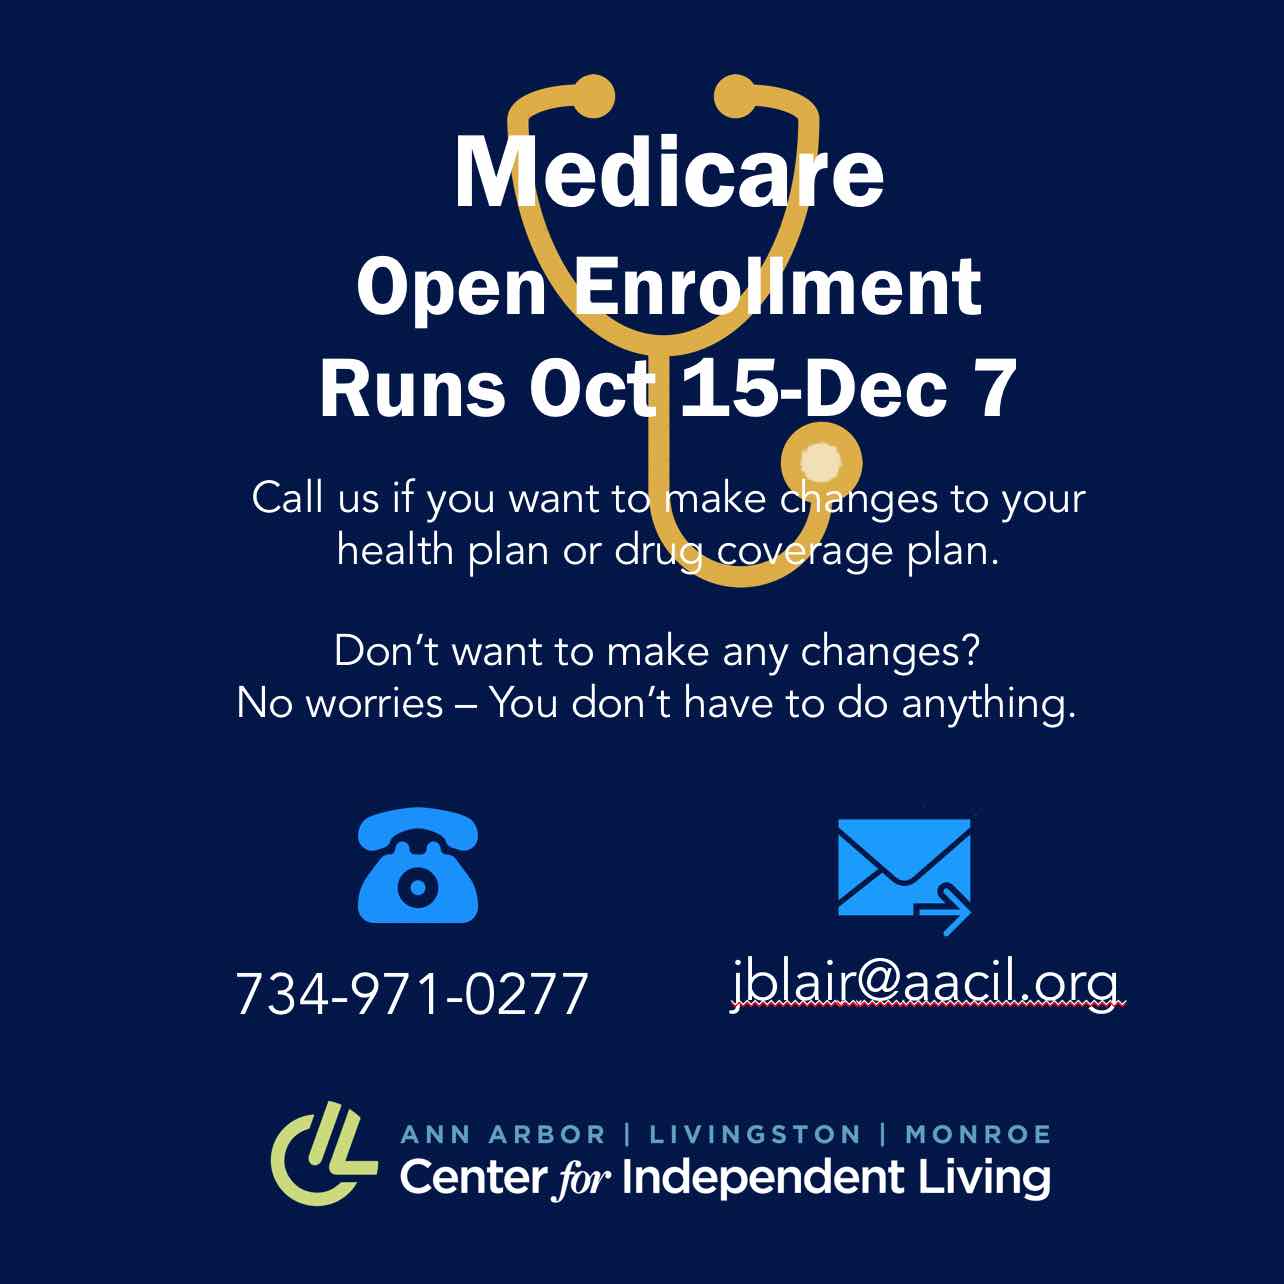 Need help with Medicare Open Enrollment?